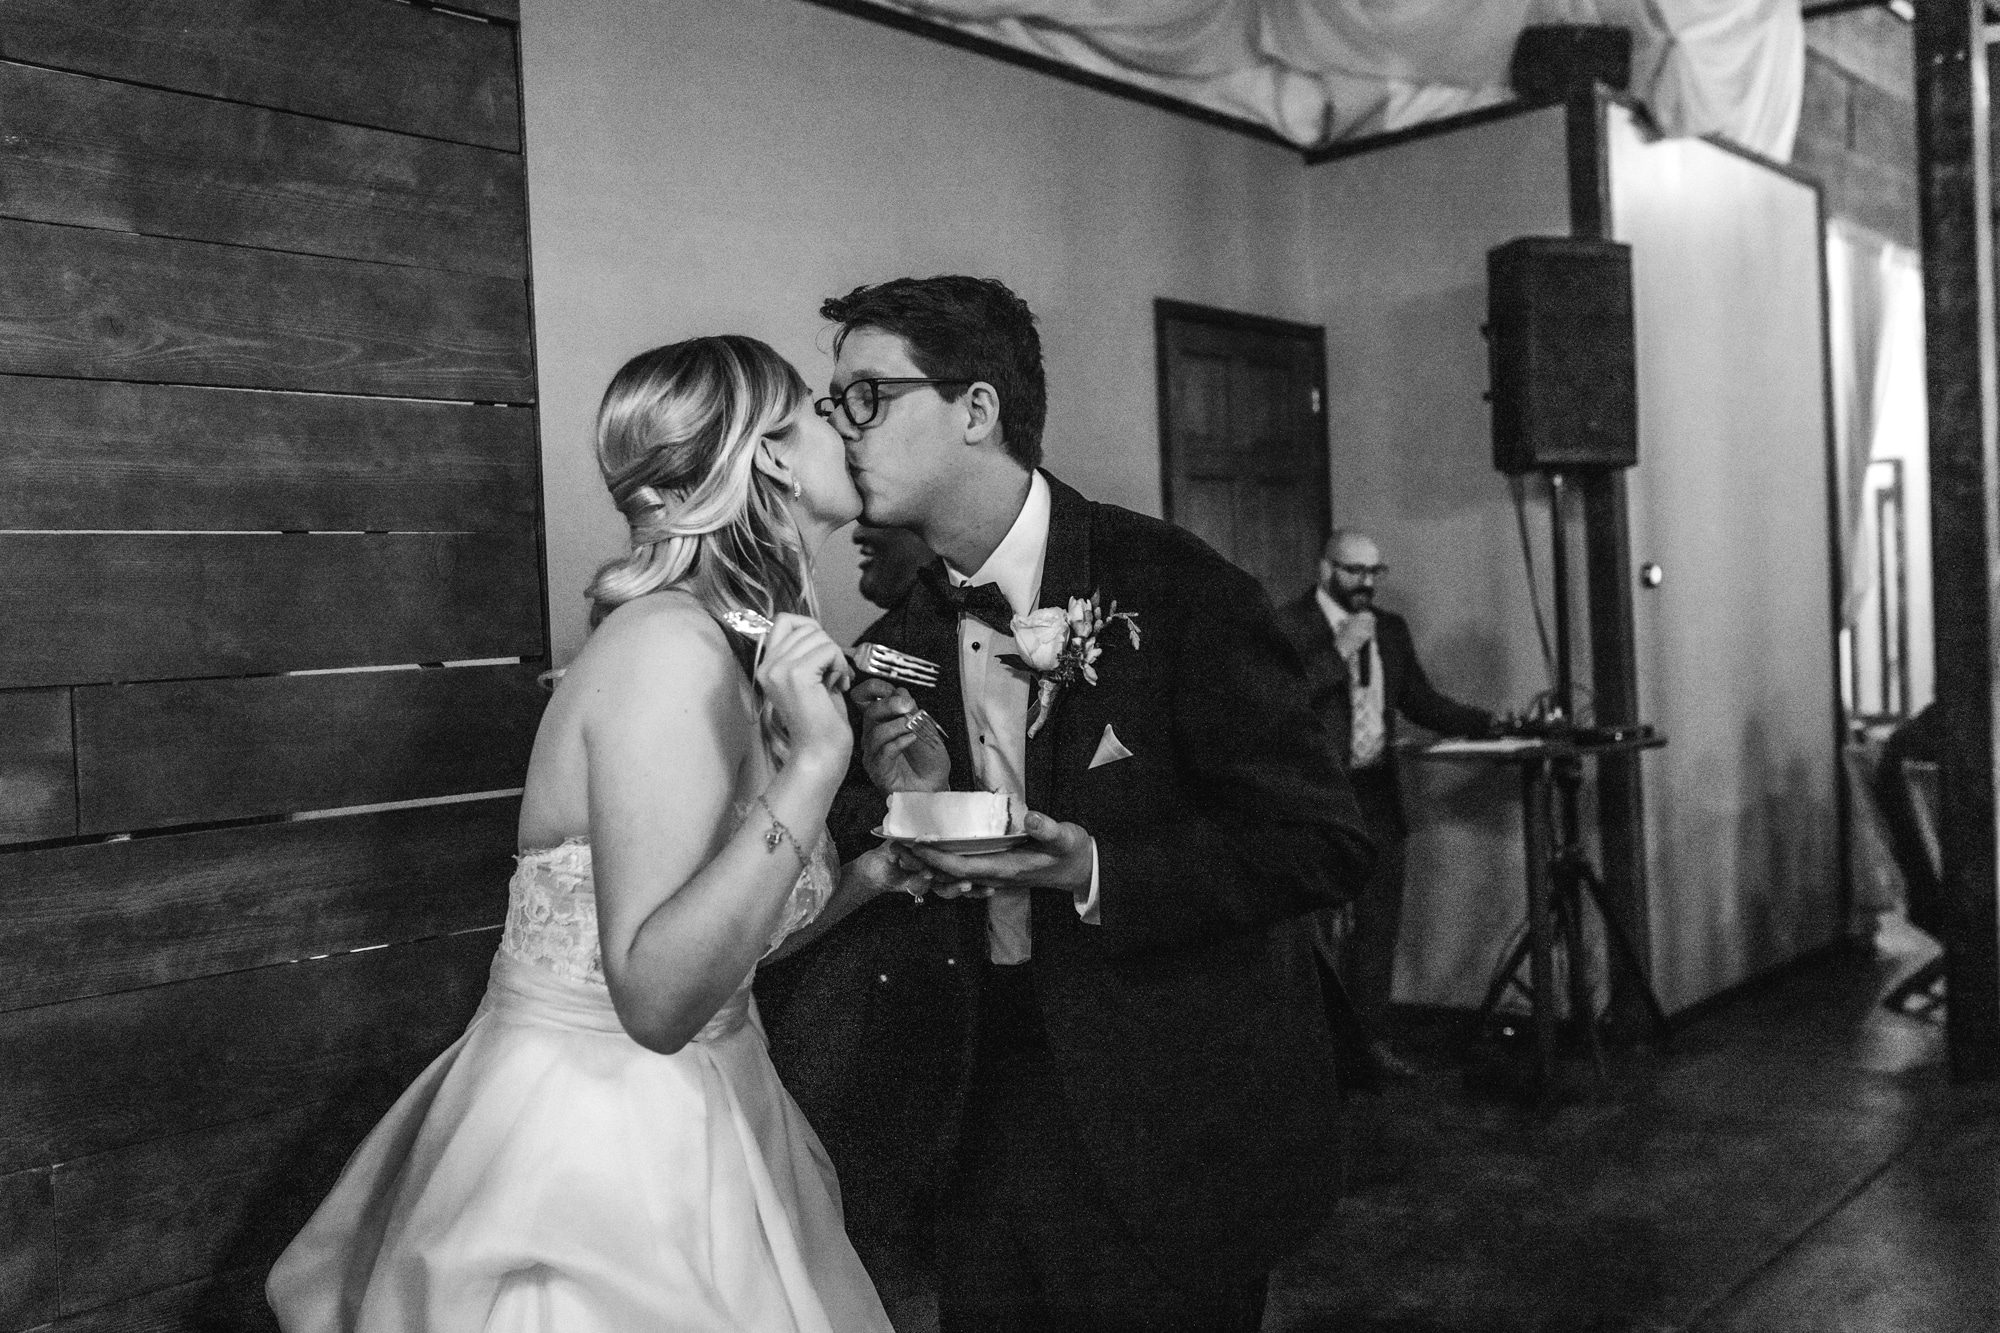 indoor wedding reception, industrial wedding venue, black and white wedding, bride and groom cutting cake, groom with glasses